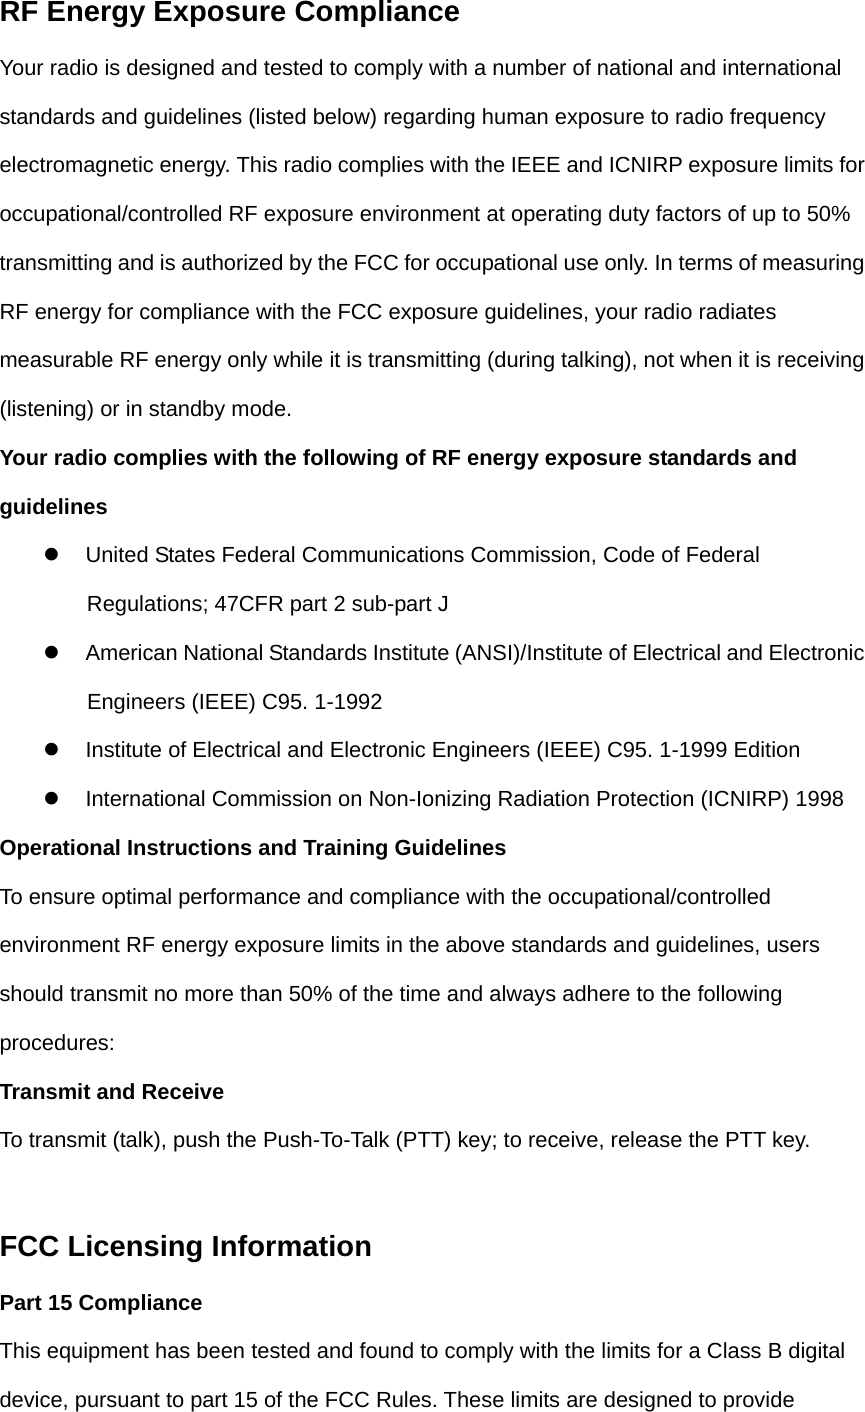 RF Energy Exposure Compliance Your radio is designed and tested to comply with a number of national and international standards and guidelines (listed below) regarding human exposure to radio frequency electromagnetic energy. This radio complies with the IEEE and ICNIRP exposure limits for occupational/controlled RF exposure environment at operating duty factors of up to 50% transmitting and is authorized by the FCC for occupational use only. In terms of measuring RF energy for compliance with the FCC exposure guidelines, your radio radiates measurable RF energy only while it is transmitting (during talking), not when it is receiving (listening) or in standby mode. Your radio complies with the following of RF energy exposure standards and guidelines z    United States Federal Communications Commission, Code of Federal Regulations; 47CFR part 2 sub-part J z    American National Standards Institute (ANSI)/Institute of Electrical and Electronic Engineers (IEEE) C95. 1-1992 z    Institute of Electrical and Electronic Engineers (IEEE) C95. 1-1999 Edition z    International Commission on Non-Ionizing Radiation Protection (ICNIRP) 1998 Operational Instructions and Training Guidelines To ensure optimal performance and compliance with the occupational/controlled environment RF energy exposure limits in the above standards and guidelines, users should transmit no more than 50% of the time and always adhere to the following procedures: Transmit and Receive To transmit (talk), push the Push-To-Talk (PTT) key; to receive, release the PTT key.  FCC Licensing Information Part 15 Compliance This equipment has been tested and found to comply with the limits for a Class B digital device, pursuant to part 15 of the FCC Rules. These limits are designed to provide 